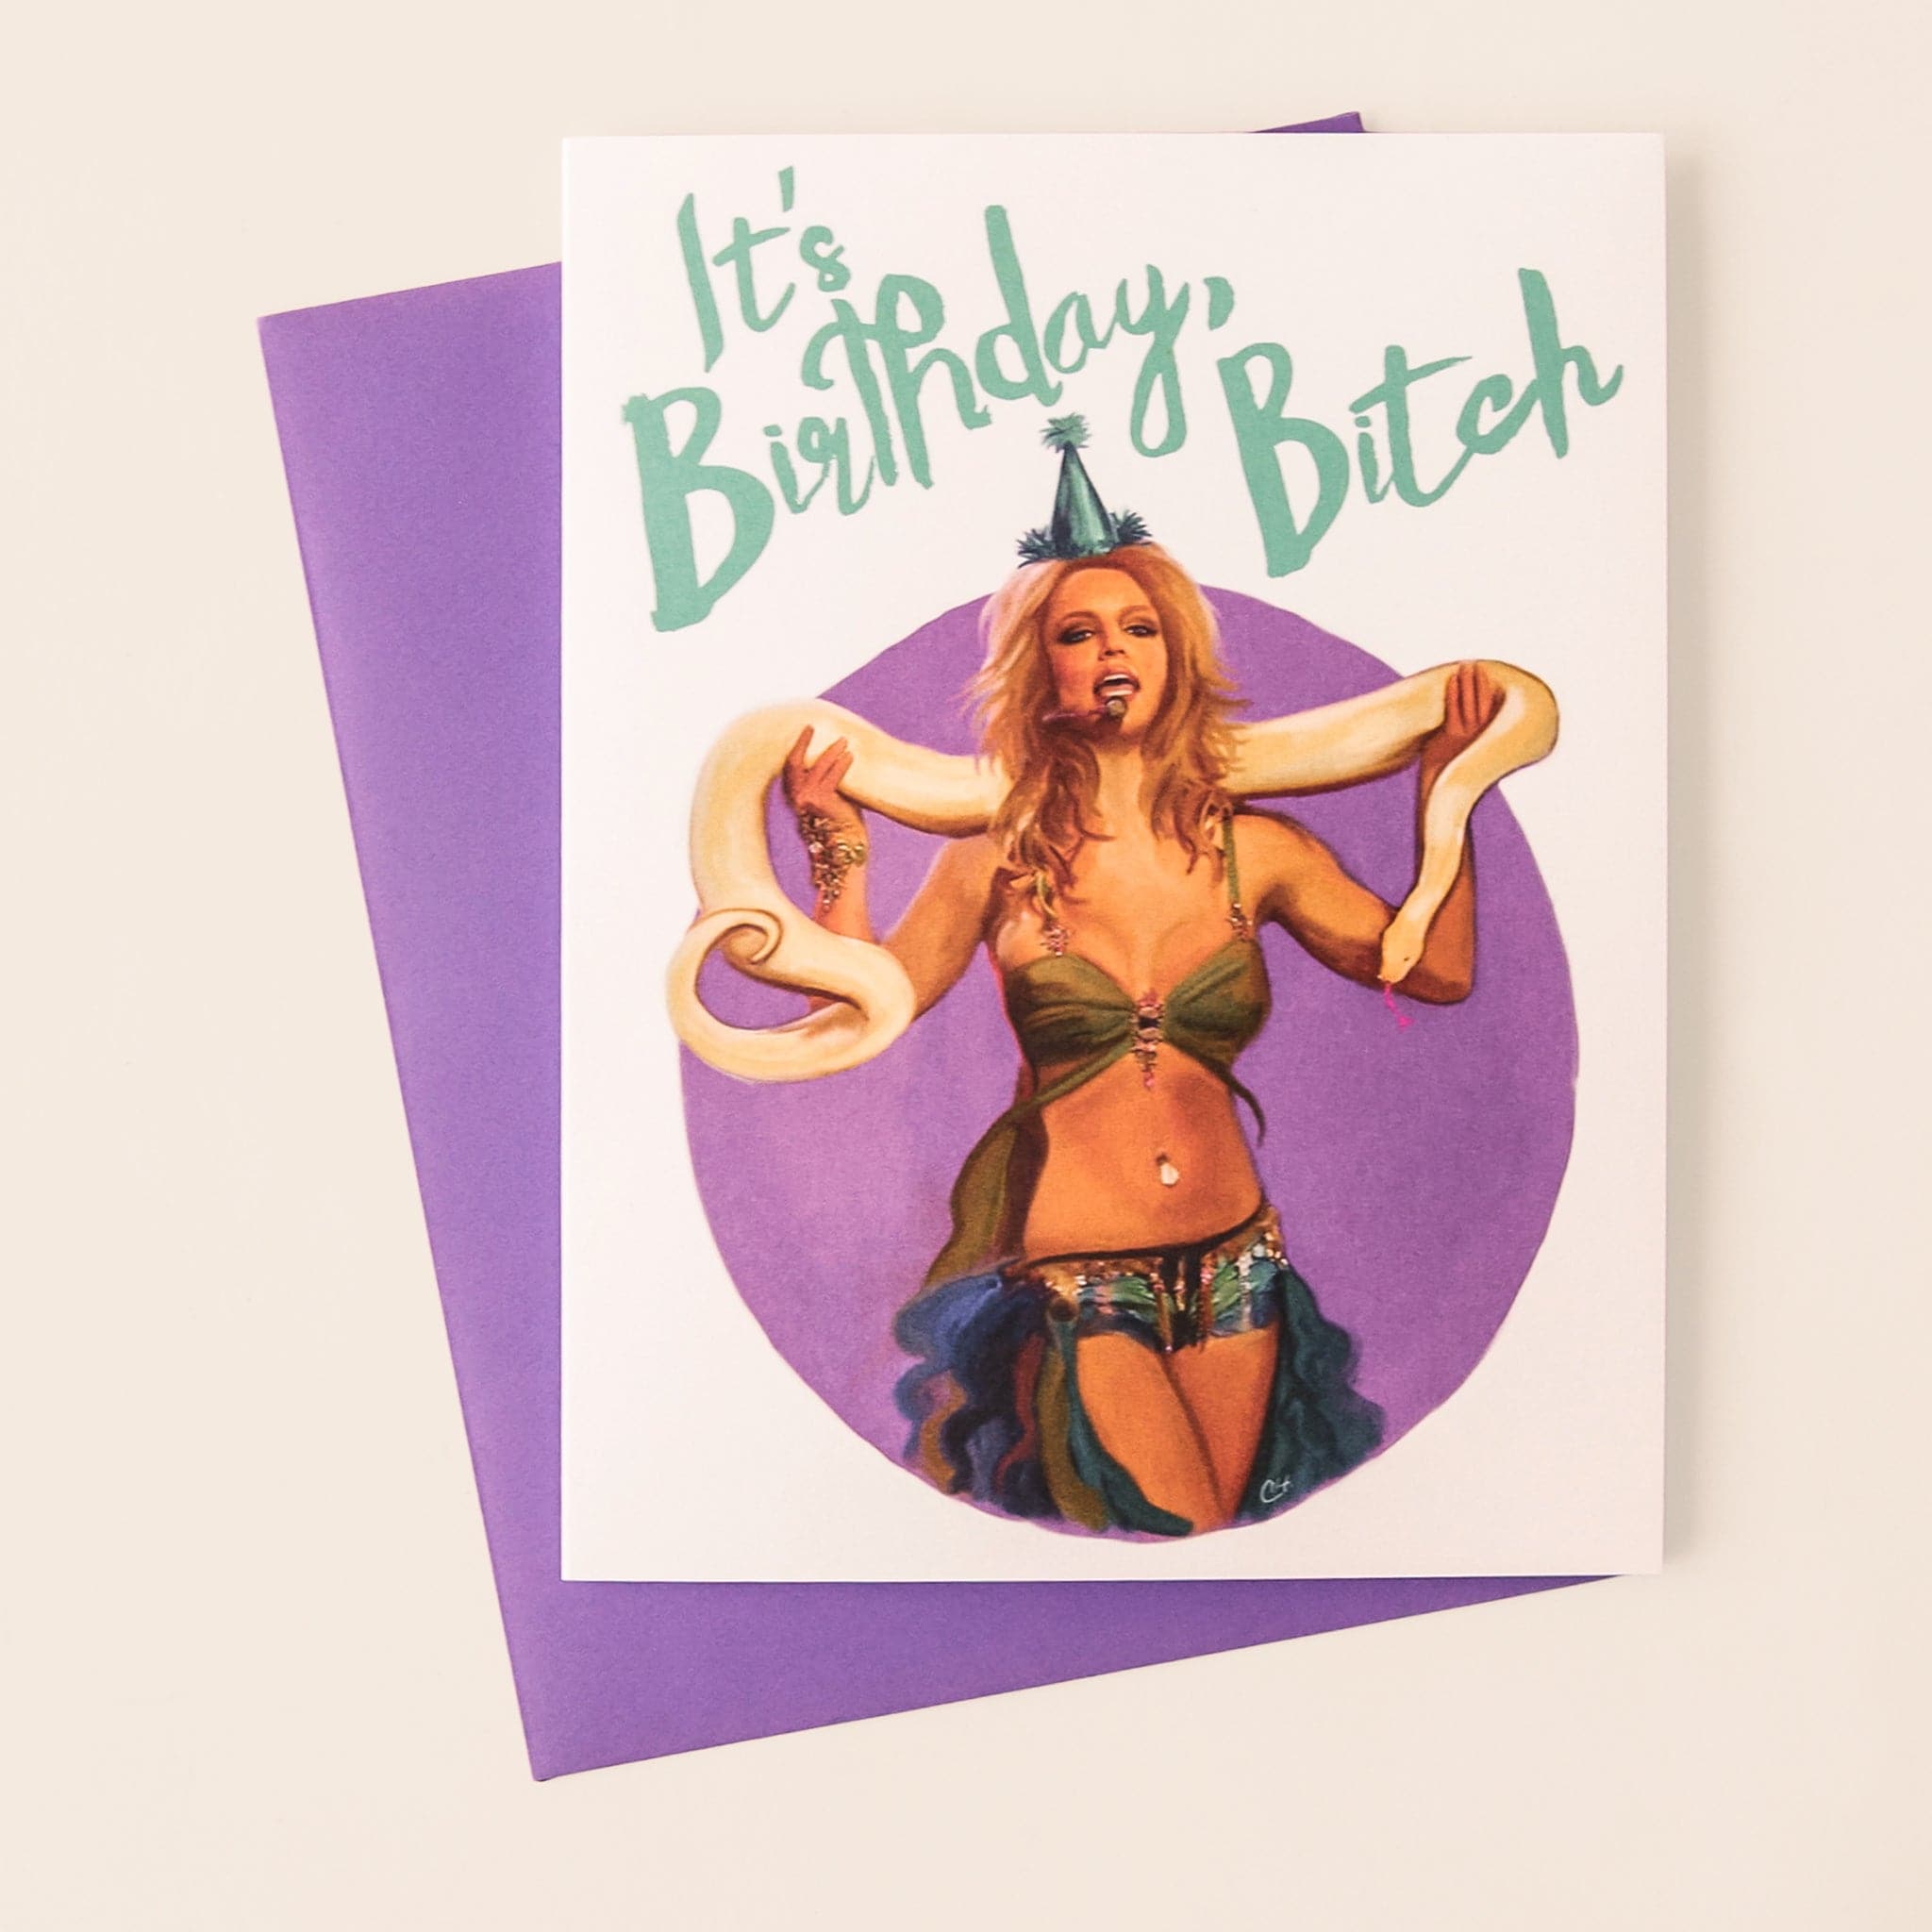 White greeting card with illustration of Britney Spears performing with boa snake and wearing party hat, with text "It's Birthday, Bitch" in teal text, with purple envelope. 